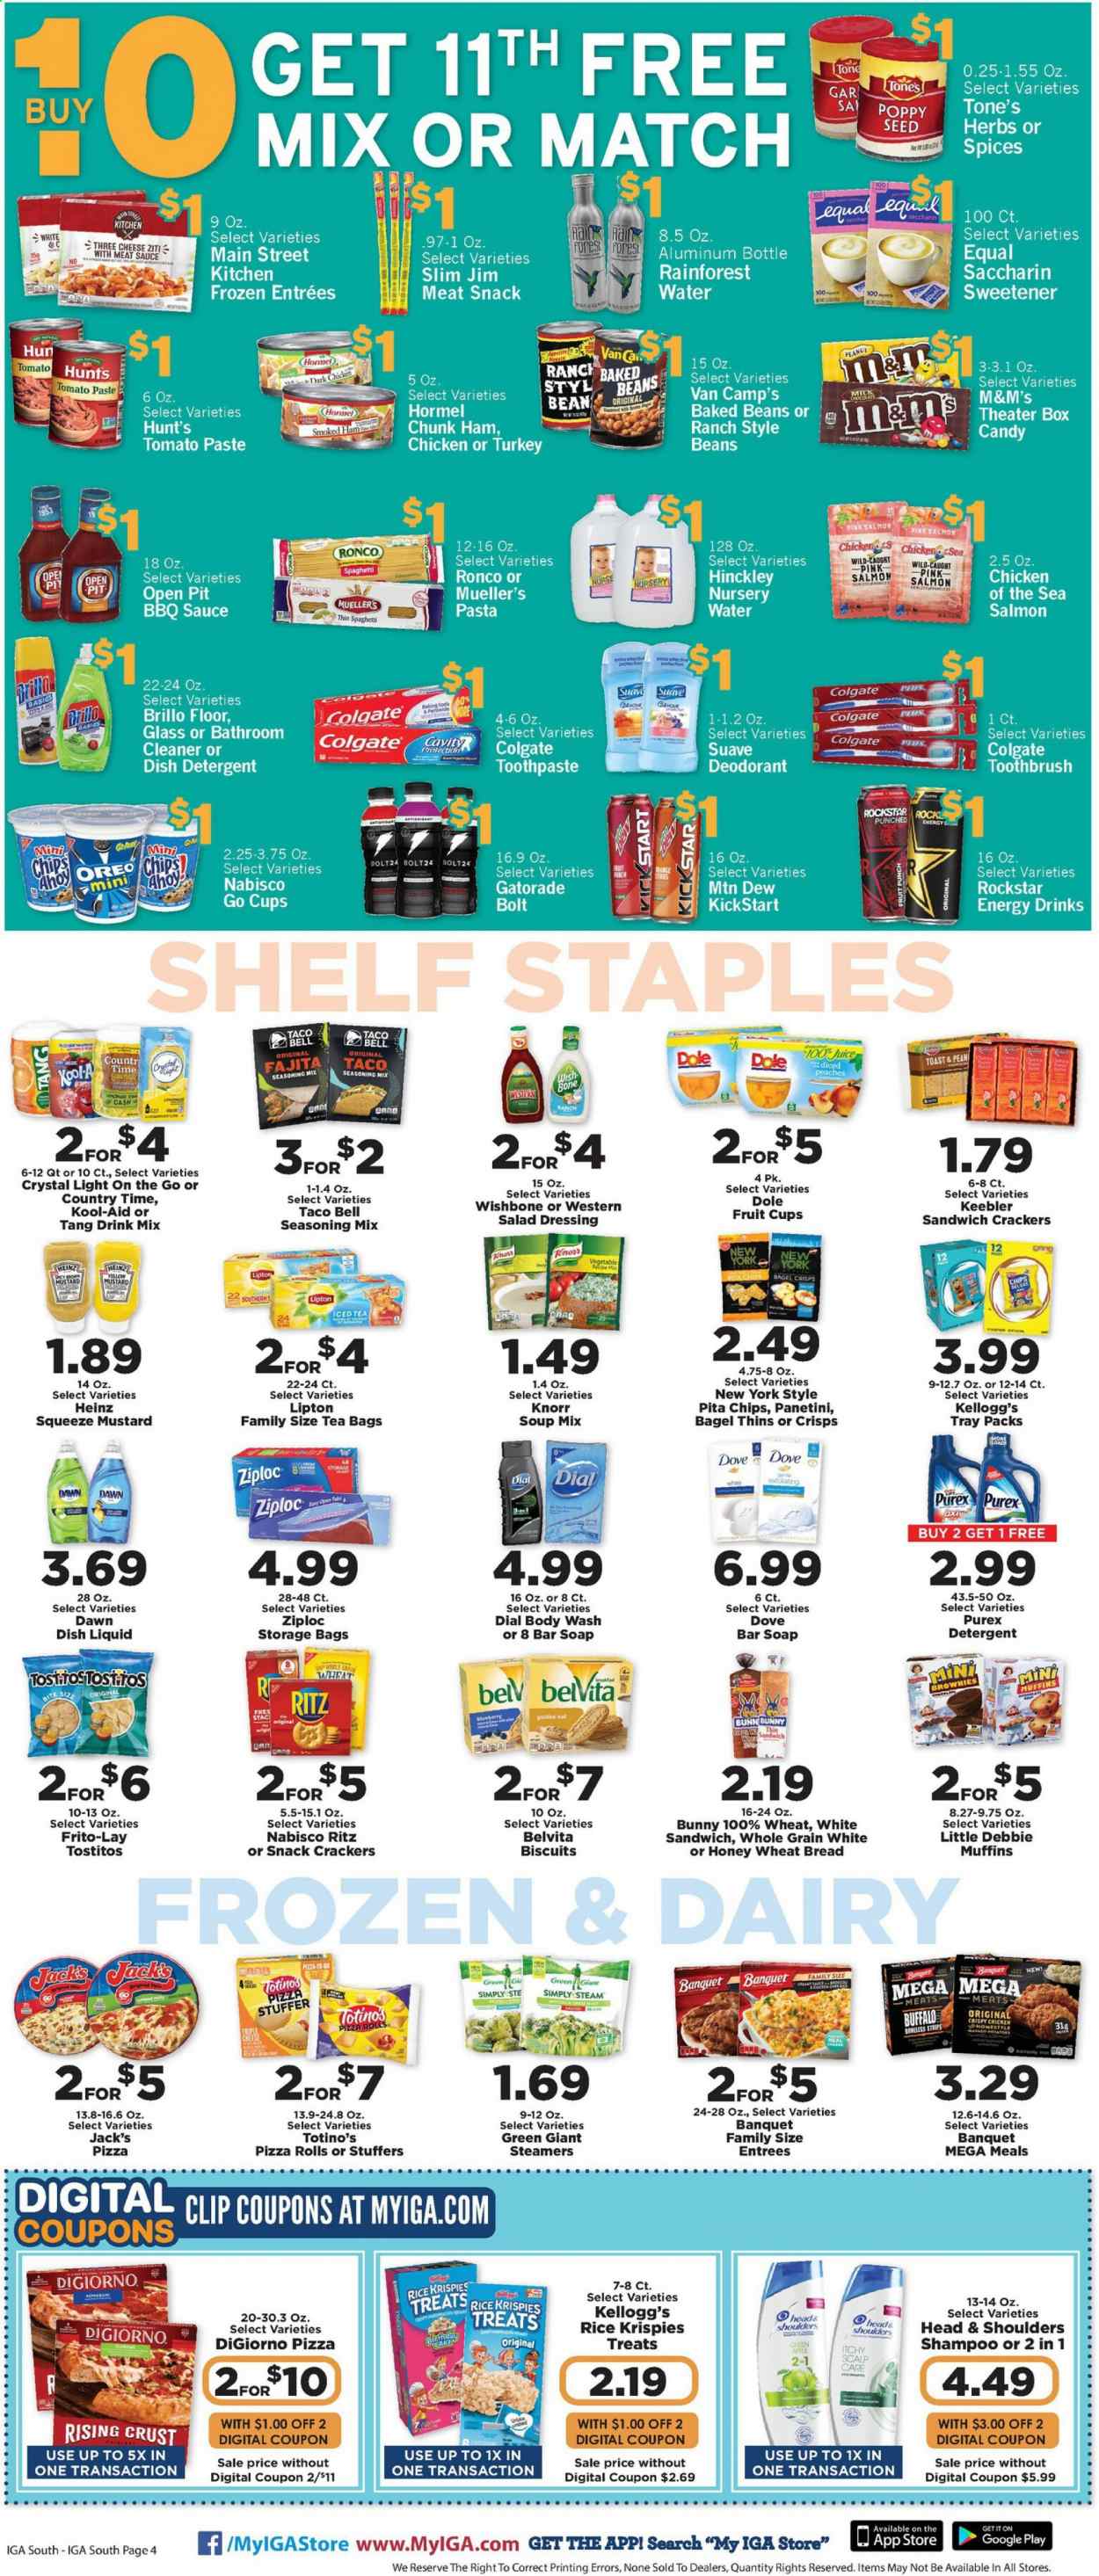 thumbnail - IGA Flyer - 08/25/2021 - 08/31/2021 - Sales products - fruit cup, wheat bread, cake, pizza rolls, brownies, muffin, beans, Dole, salmon, mashed potatoes, spaghetti, pizza, soup mix, soup, pasta, Knorr, sauce, fajita, Hormel, ham, Oreo, strips, M&M's, crackers, Kellogg's, biscuit, Keebler, RITZ, Thins, bagel crisps, Frito-Lay, Tostitos, pita chips, bicarbonate of soda, oats, sweetener, tomato paste, Heinz, baked beans, Chicken of the Sea, Rice Krispies, belVita, spice, BBQ sauce, mustard, salad dressing, dressing, Mountain Dew, juice, energy drink, Lipton, Country Time, Rockstar, Gatorade, fruit punch, tea bags, Dove, detergent, cleaner, Purex, dishwashing liquid, body wash, shampoo, Suave, soap bar, Dial, soap, Colgate, toothbrush, toothpaste, Head & Shoulders, anti-perspirant, deodorant, Ziploc, storage bag. Page 4.